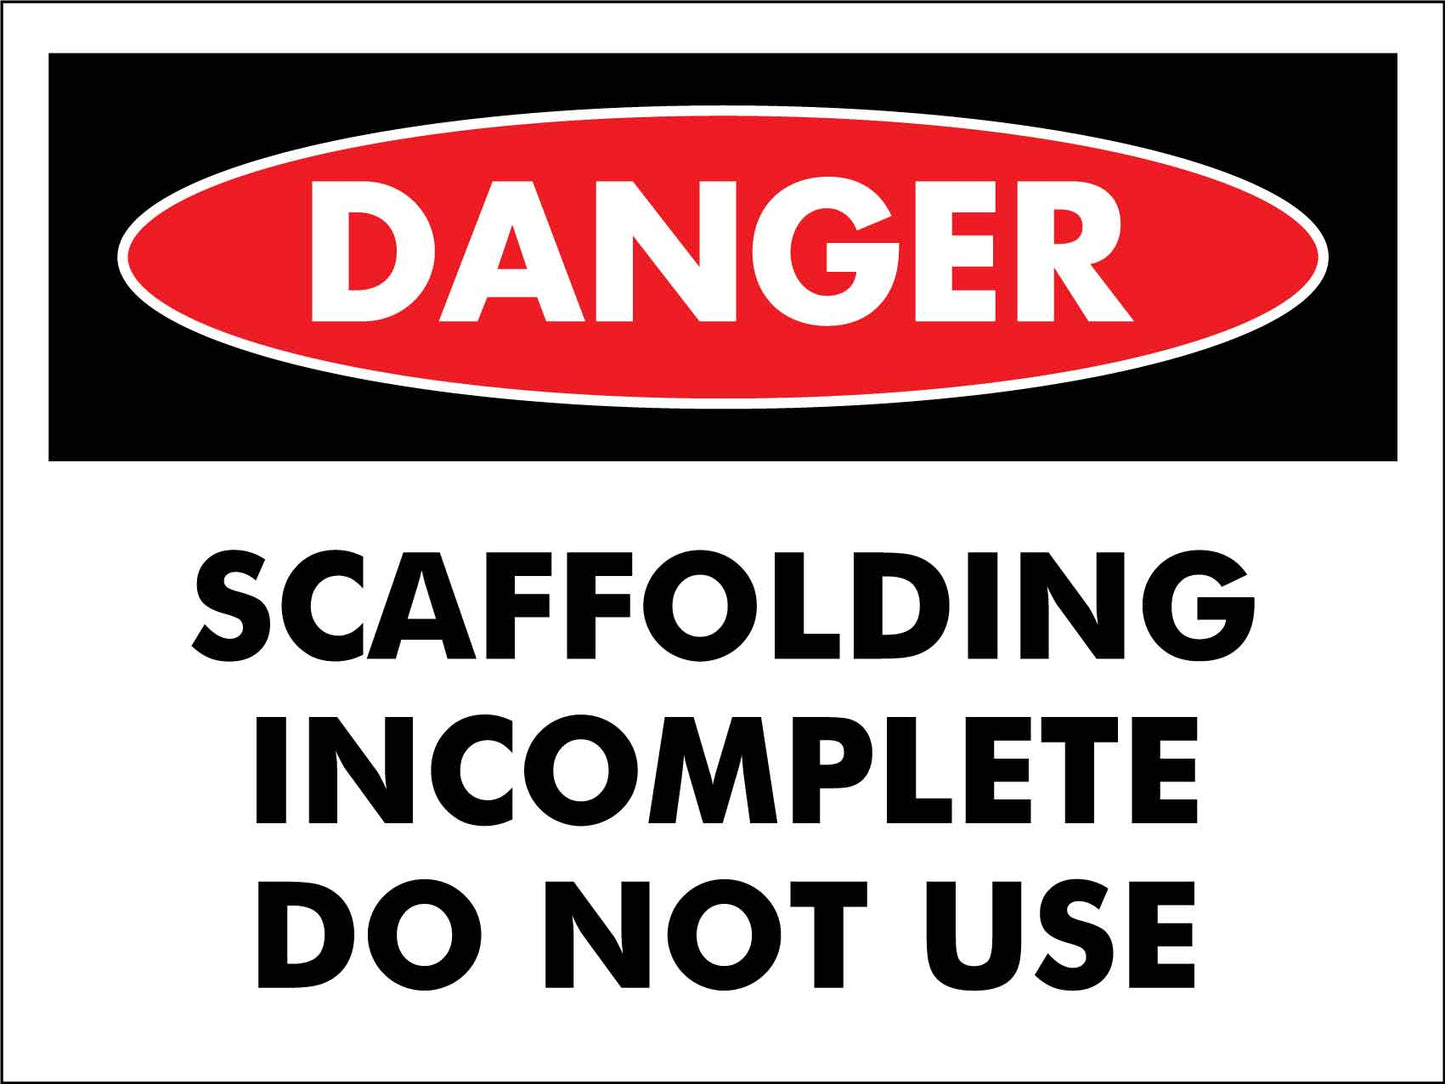 Danger Scaffolding Incomplete Do Not Use Sign